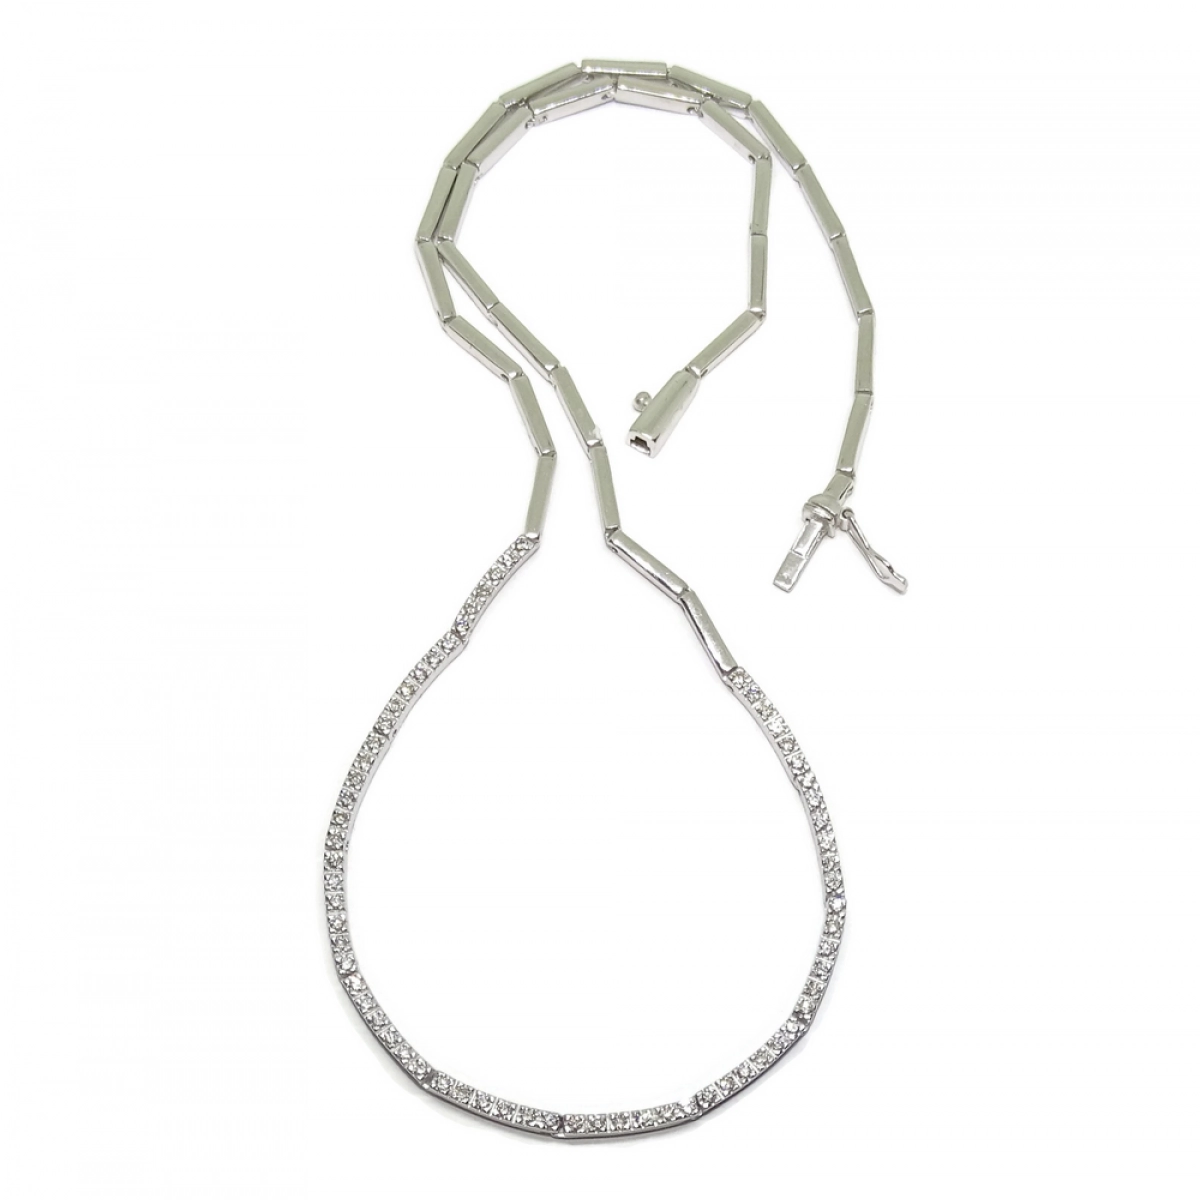 STUNNING CHOKER NECKLACE SEMI-R�GIDA IN 18K WHITE GOLD AND 1.05 CTS OF DIAMONDS NEVER SAY NEVER